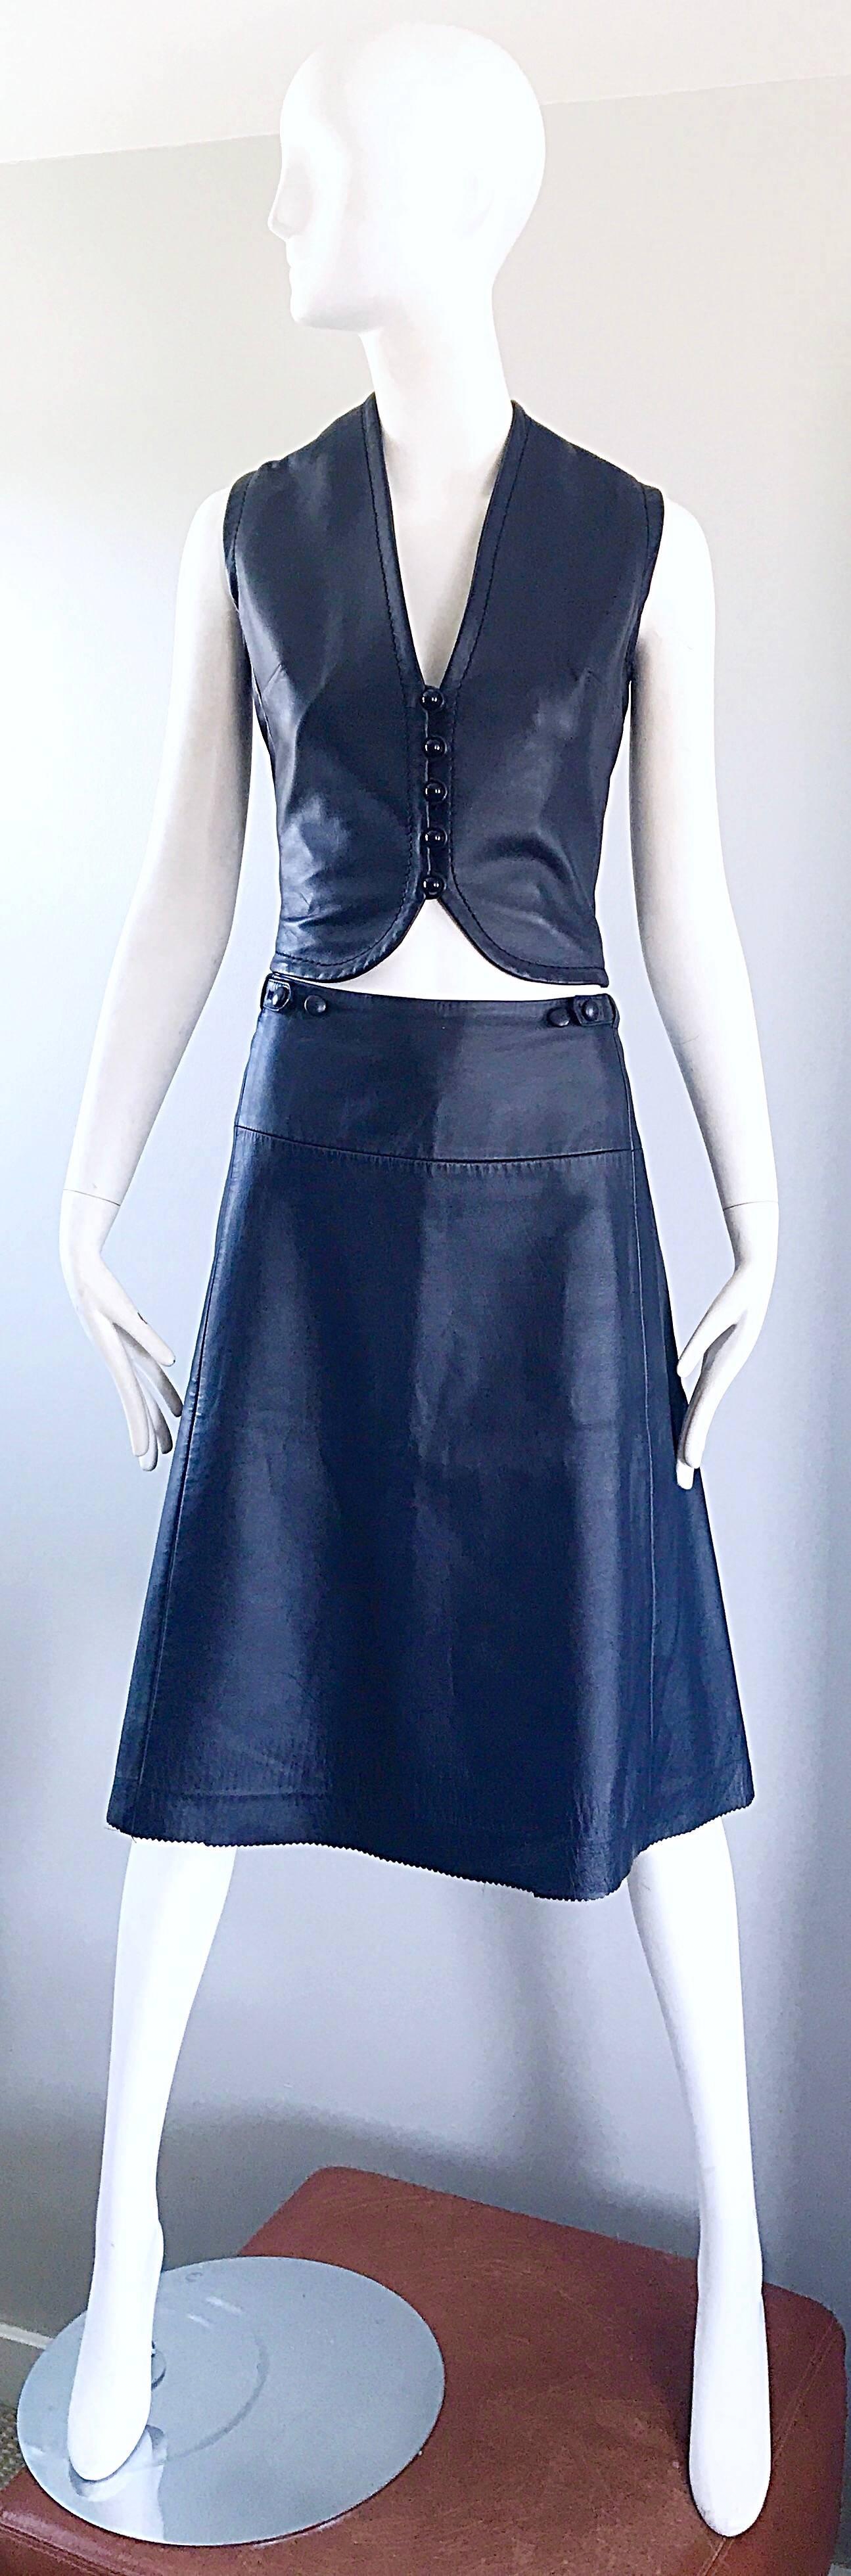 Rare 60s vintage JEAN PATOU, by KARL LAGERFELD navy blue leather crop vest and A-Line skirt! Luxurious soft leather that appears to be unworn. Vest buttons up the front. Skirt features a zipper in the back with hook-and-eye closure. Skirt also